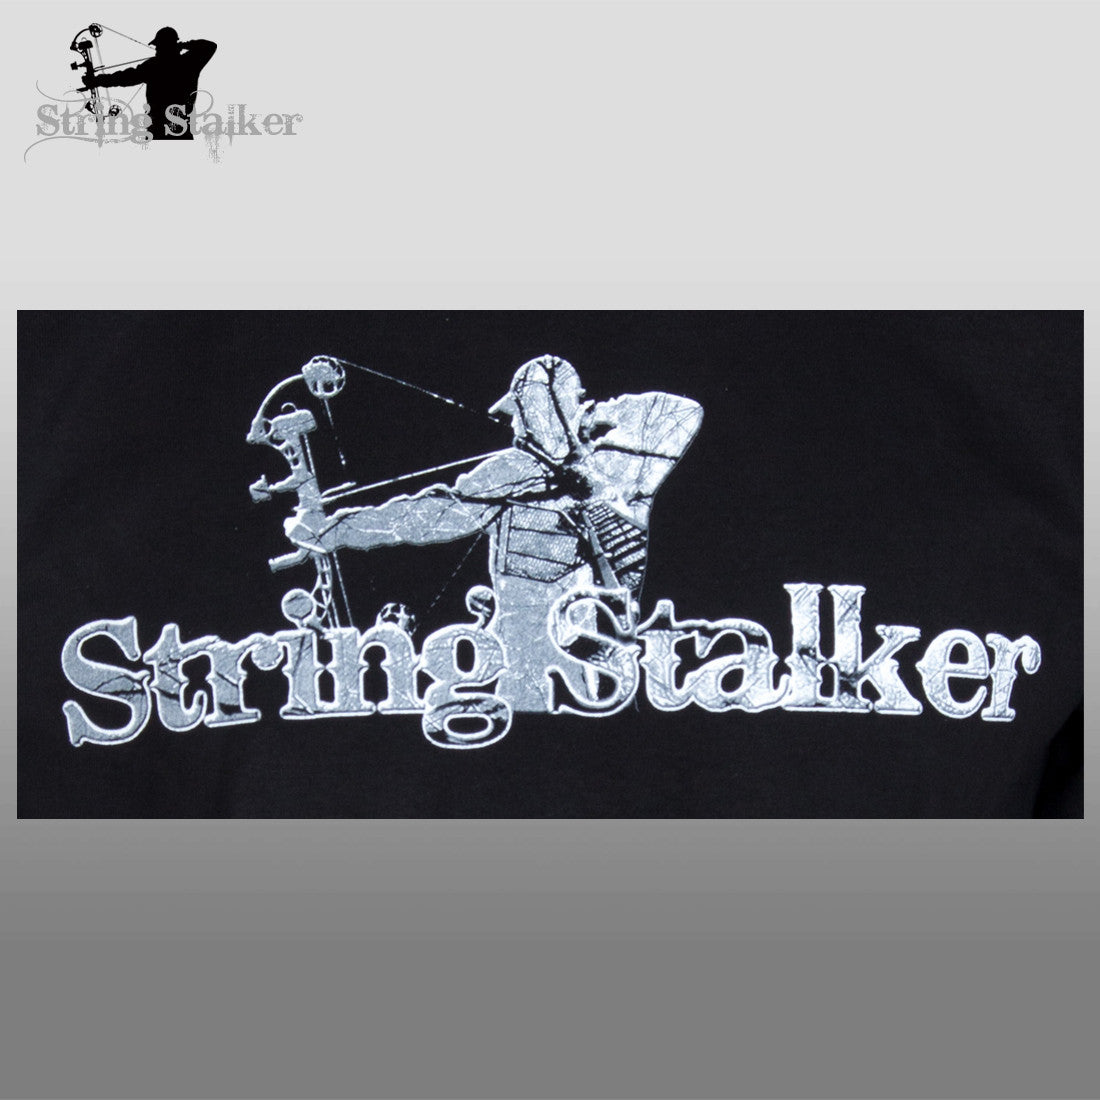 String Stalker This Too Shall Pass Bow Hunting T Shirt - String Stalker